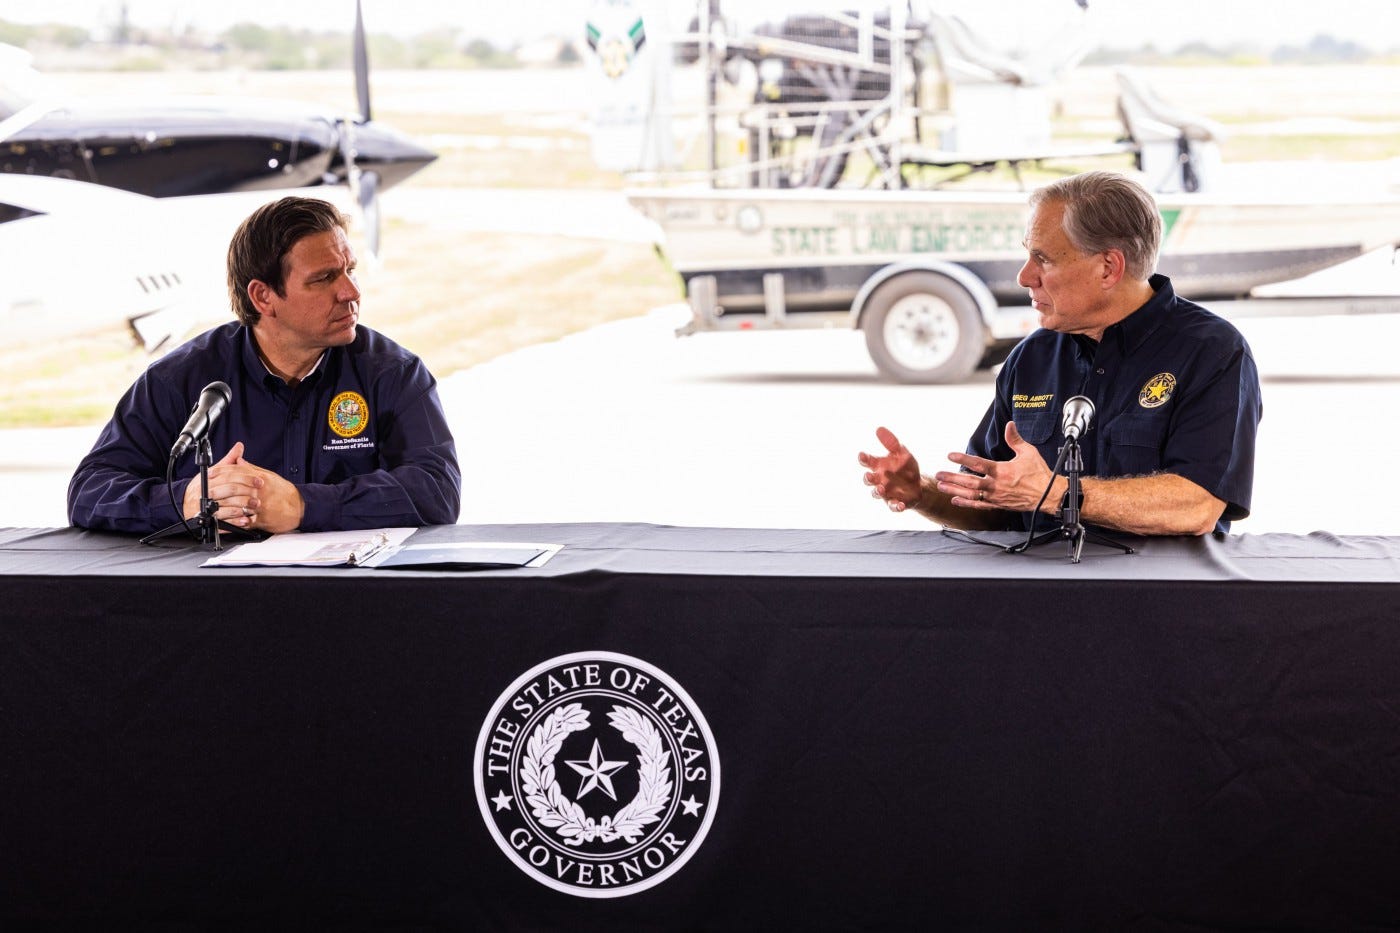 Governor Abbott Hosts Florida Governor DeSantis For Border Security  Briefing In Del Rio | Office of the Texas Governor | Greg Abbott